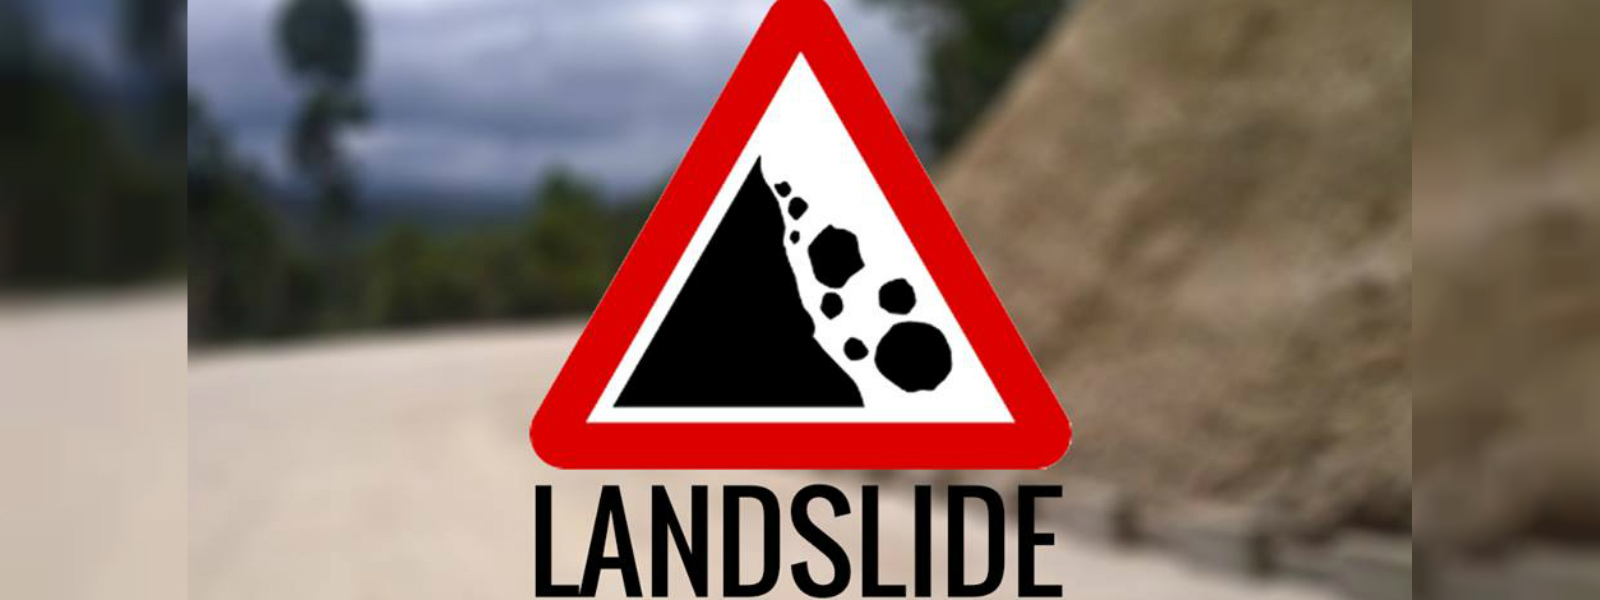 Landslide warning remains in place for 7 districts